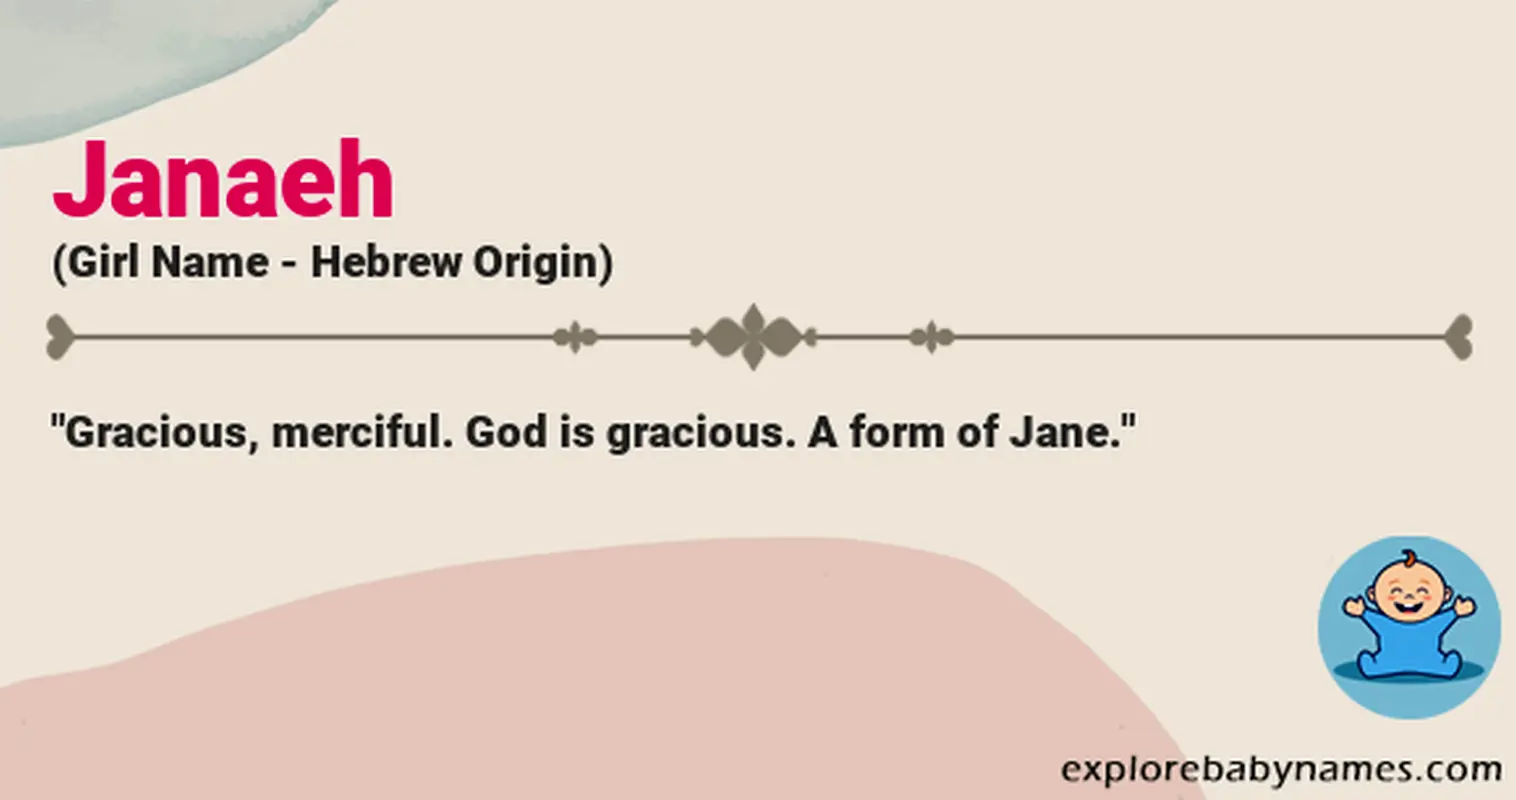 Meaning of Janaeh